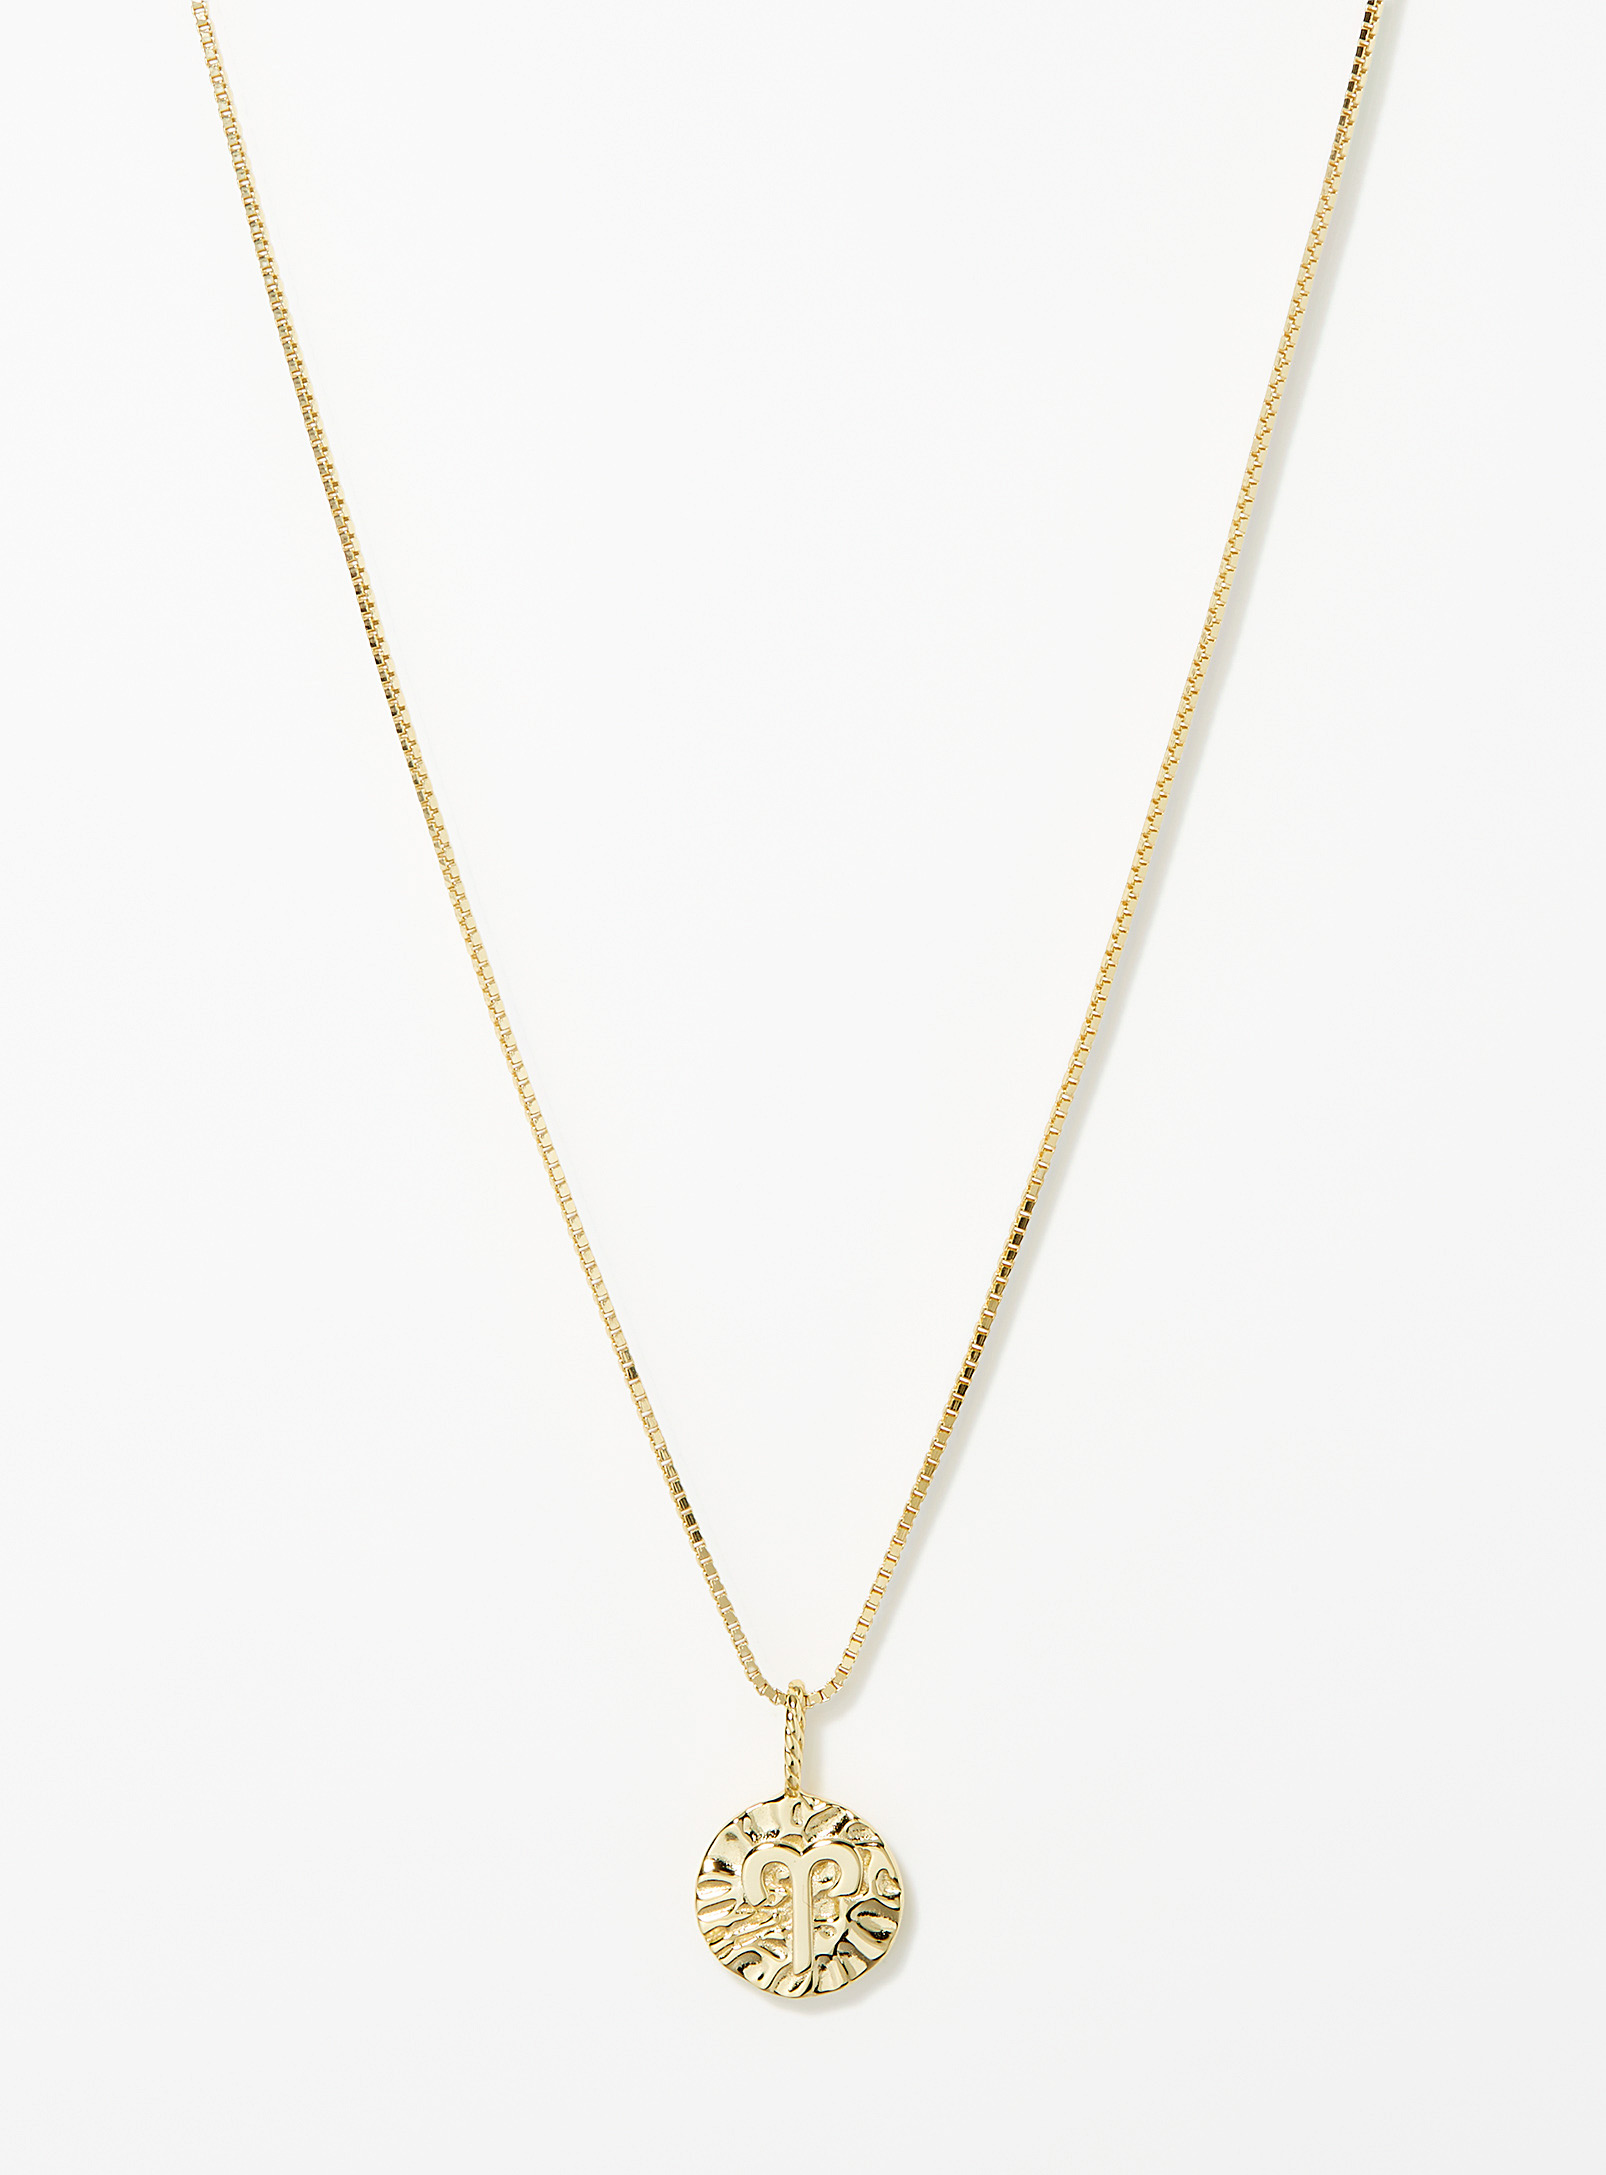 Midi34 X Simons Shimmery Astro Necklace In Grey